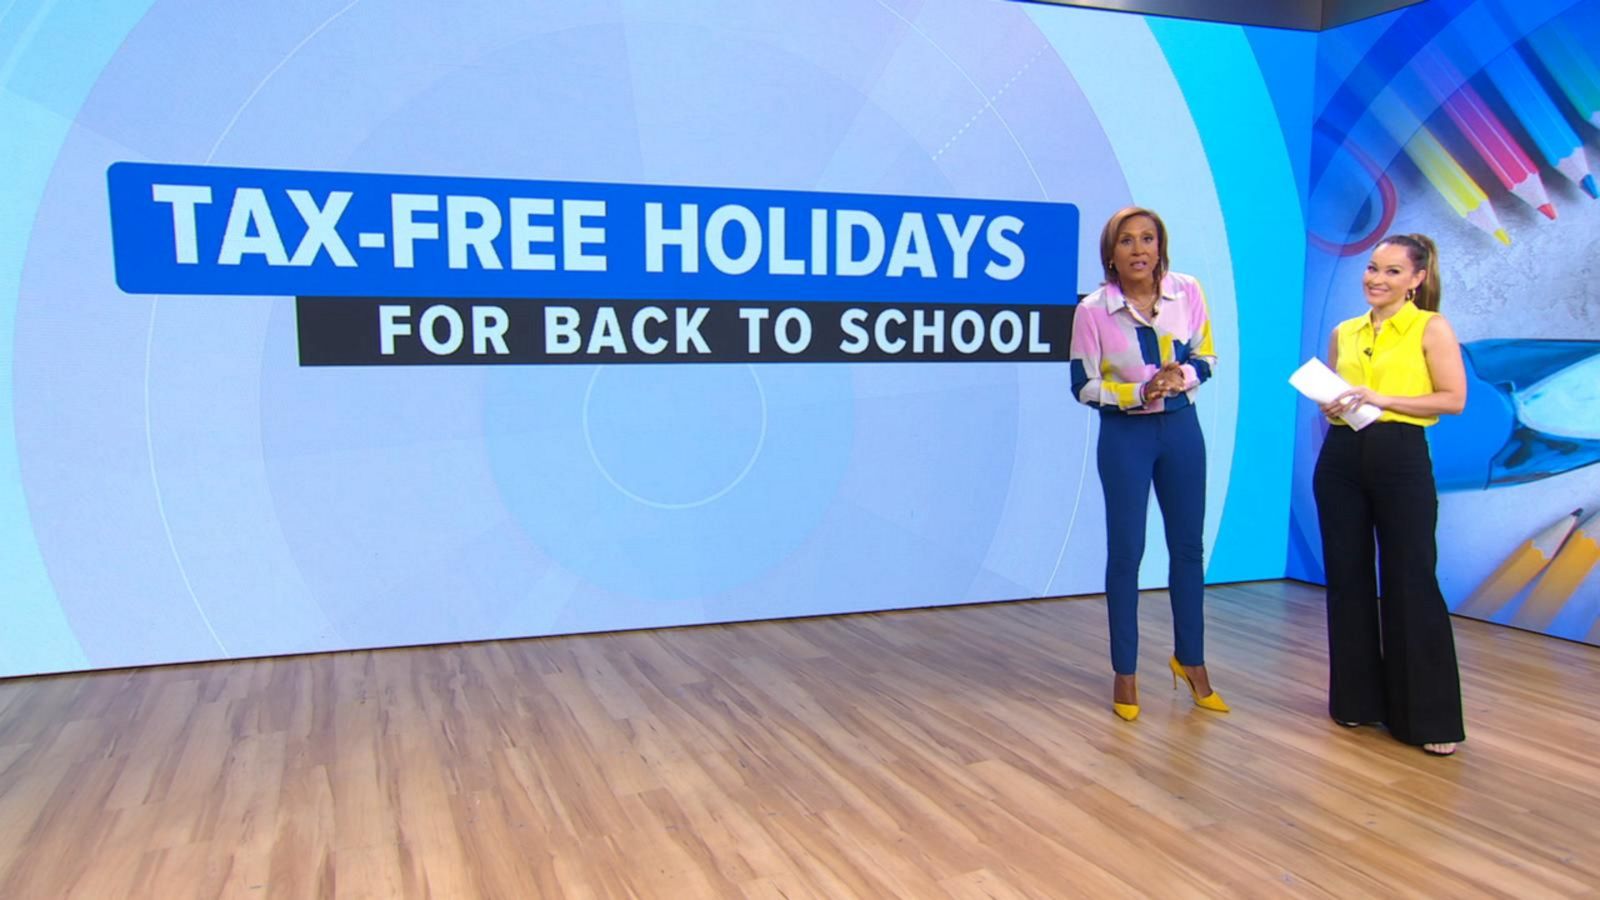 VIDEO: Save on back-to-school supplies with tax-free holidays